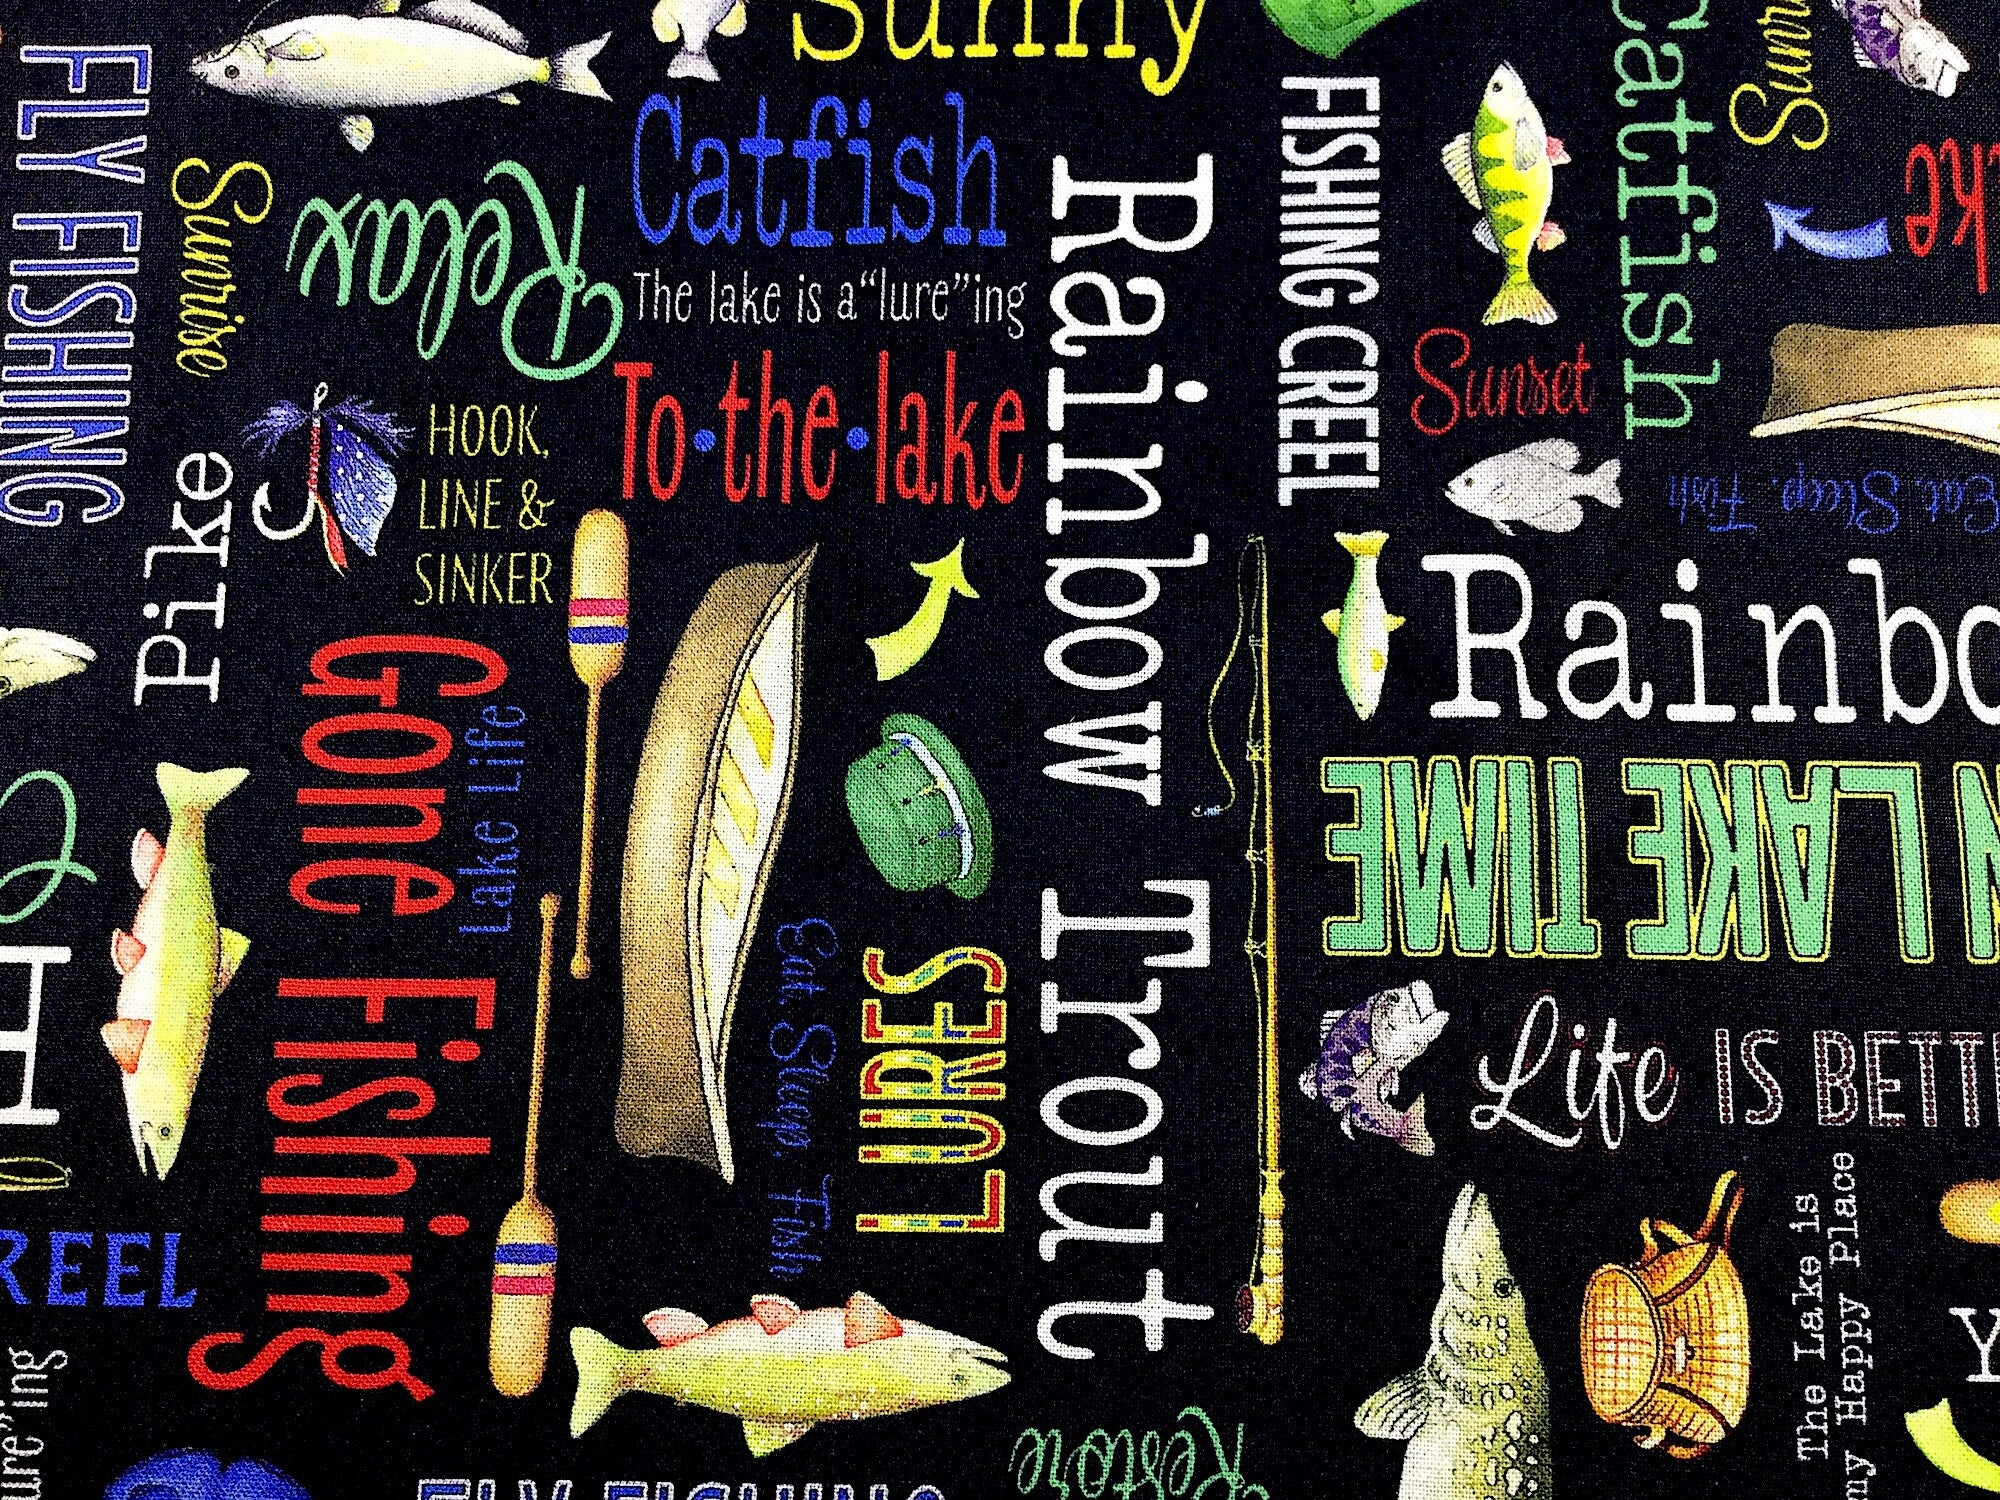 This fabric is part of the Keep it Reel Collection and is covered with trout and the following words: Yellow Perch, Welcome to the Cabin, Gone Fishing, Rest and Restore, Brook Trout, To the Lake, Life is Better at the Lake, Rod and Reel and more.